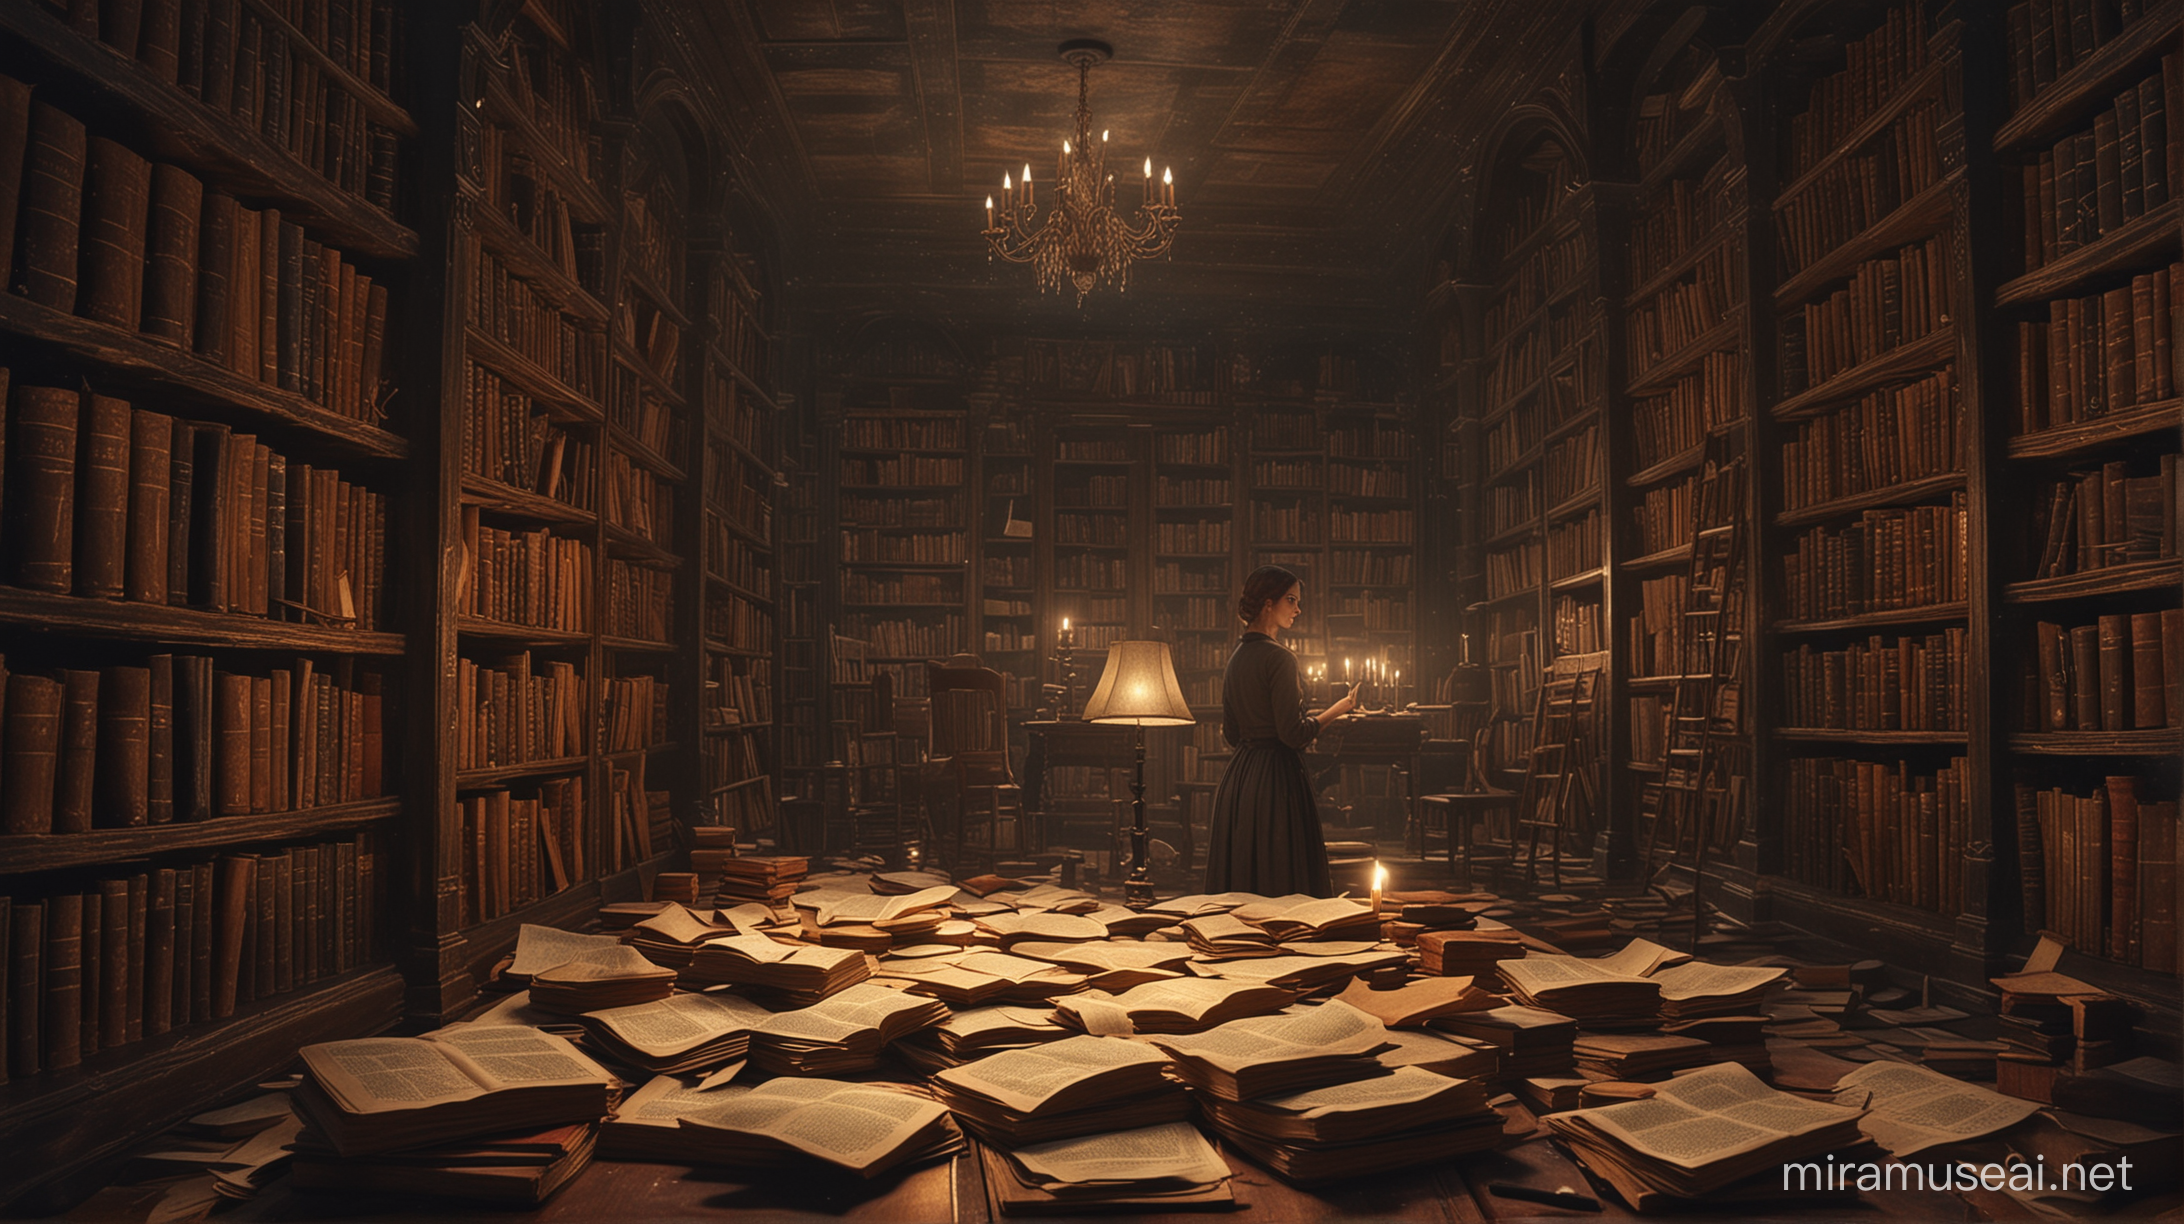 Librarian in a mysterious library, floating rumors, slight chaos, dark and mysterious, vintage painting style, dim lighting, bookshelves with ancient tomes, scattered papers, whispered secrets, enigmatic atmosphere, 4k, vintage painting, mysterious, chaotic, dim lighting, ancient tomes, whispered secrets, enigmatic atmosphere